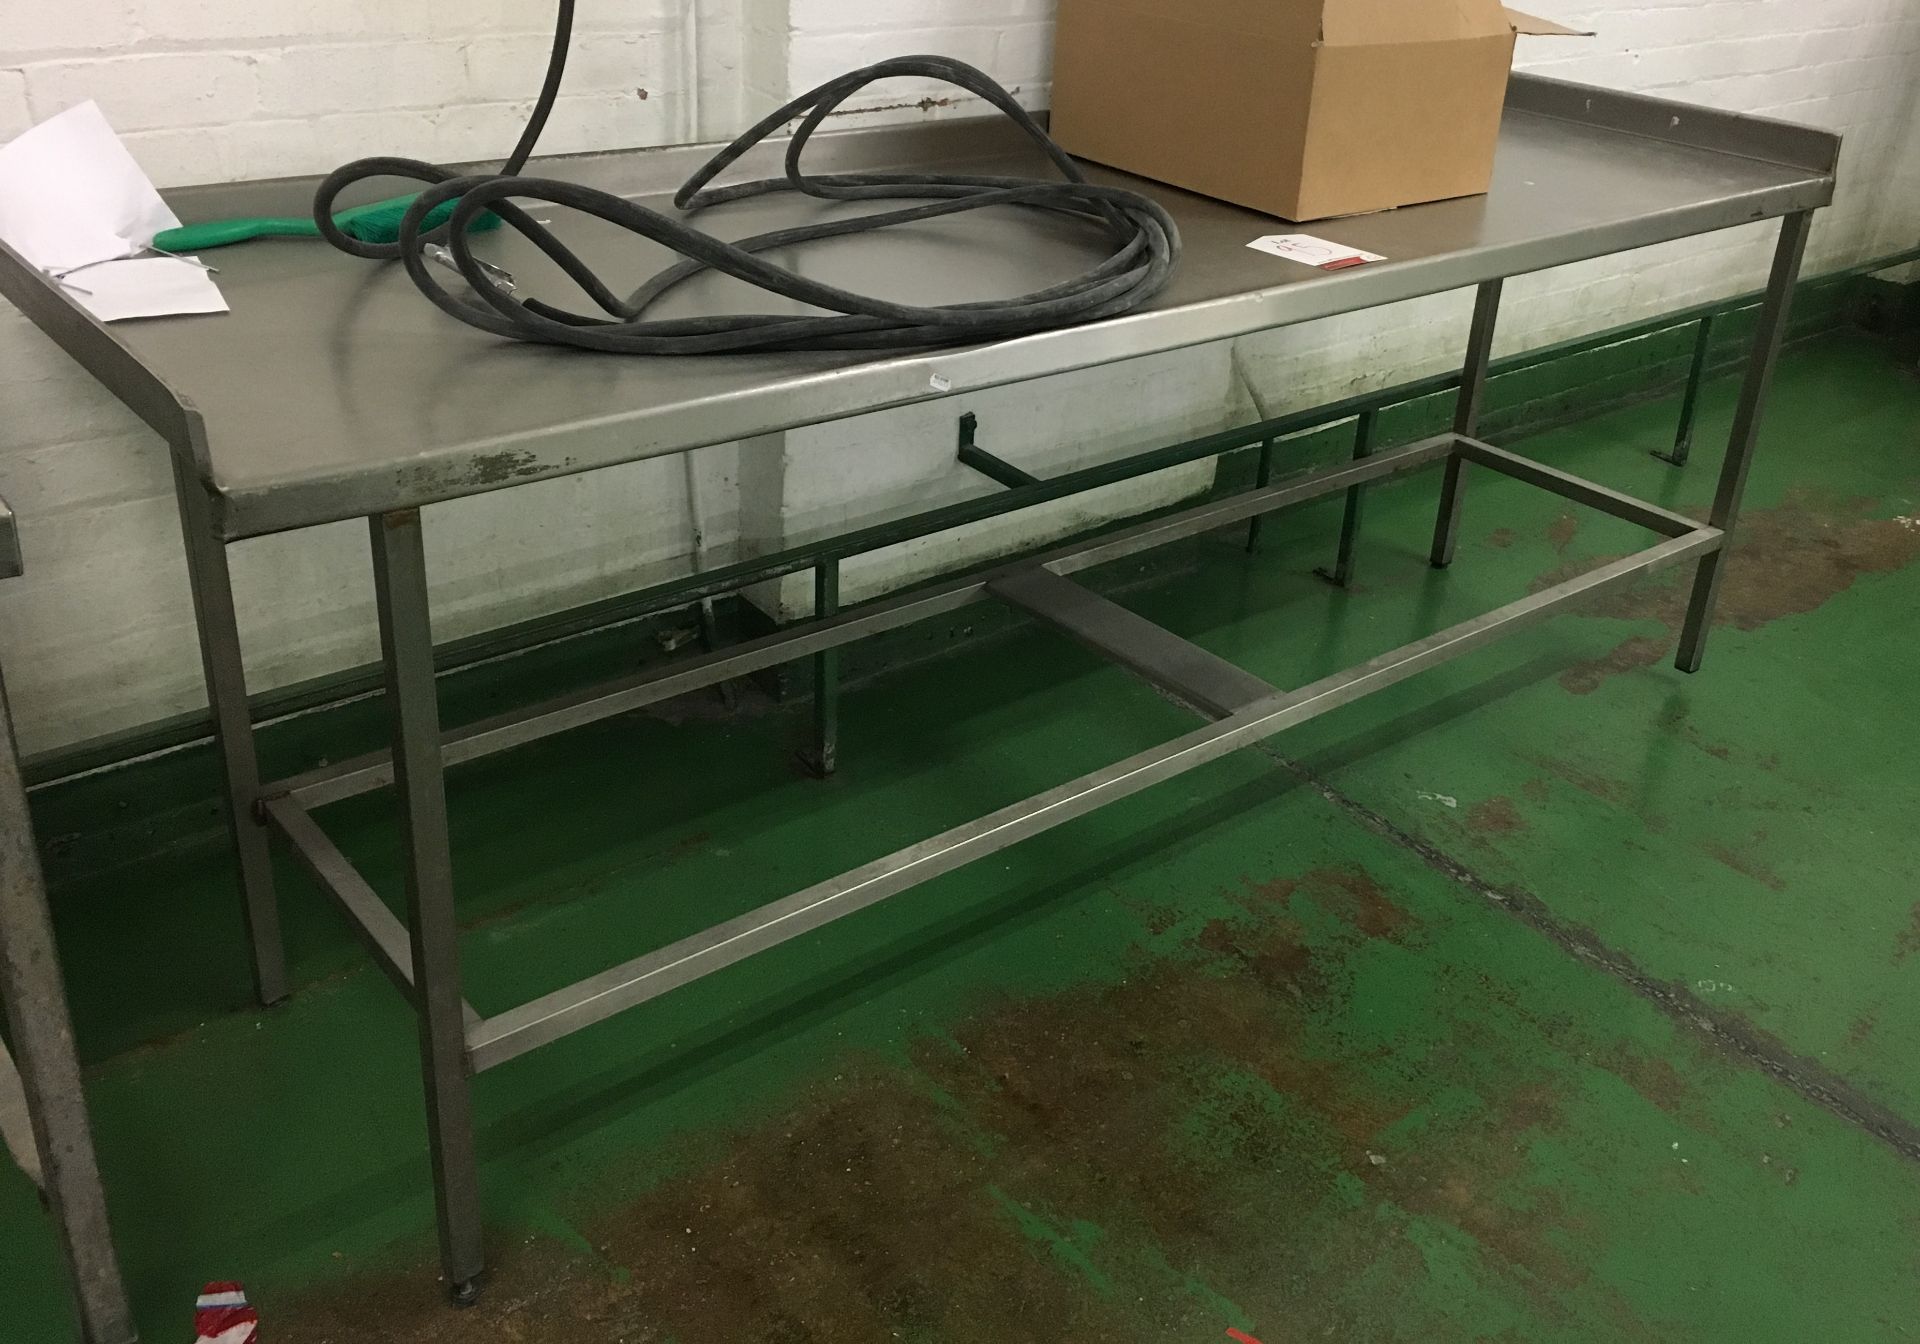 Stainless Steel Preparation Table - 230cm x 70cm x 90cm - Image 2 of 2